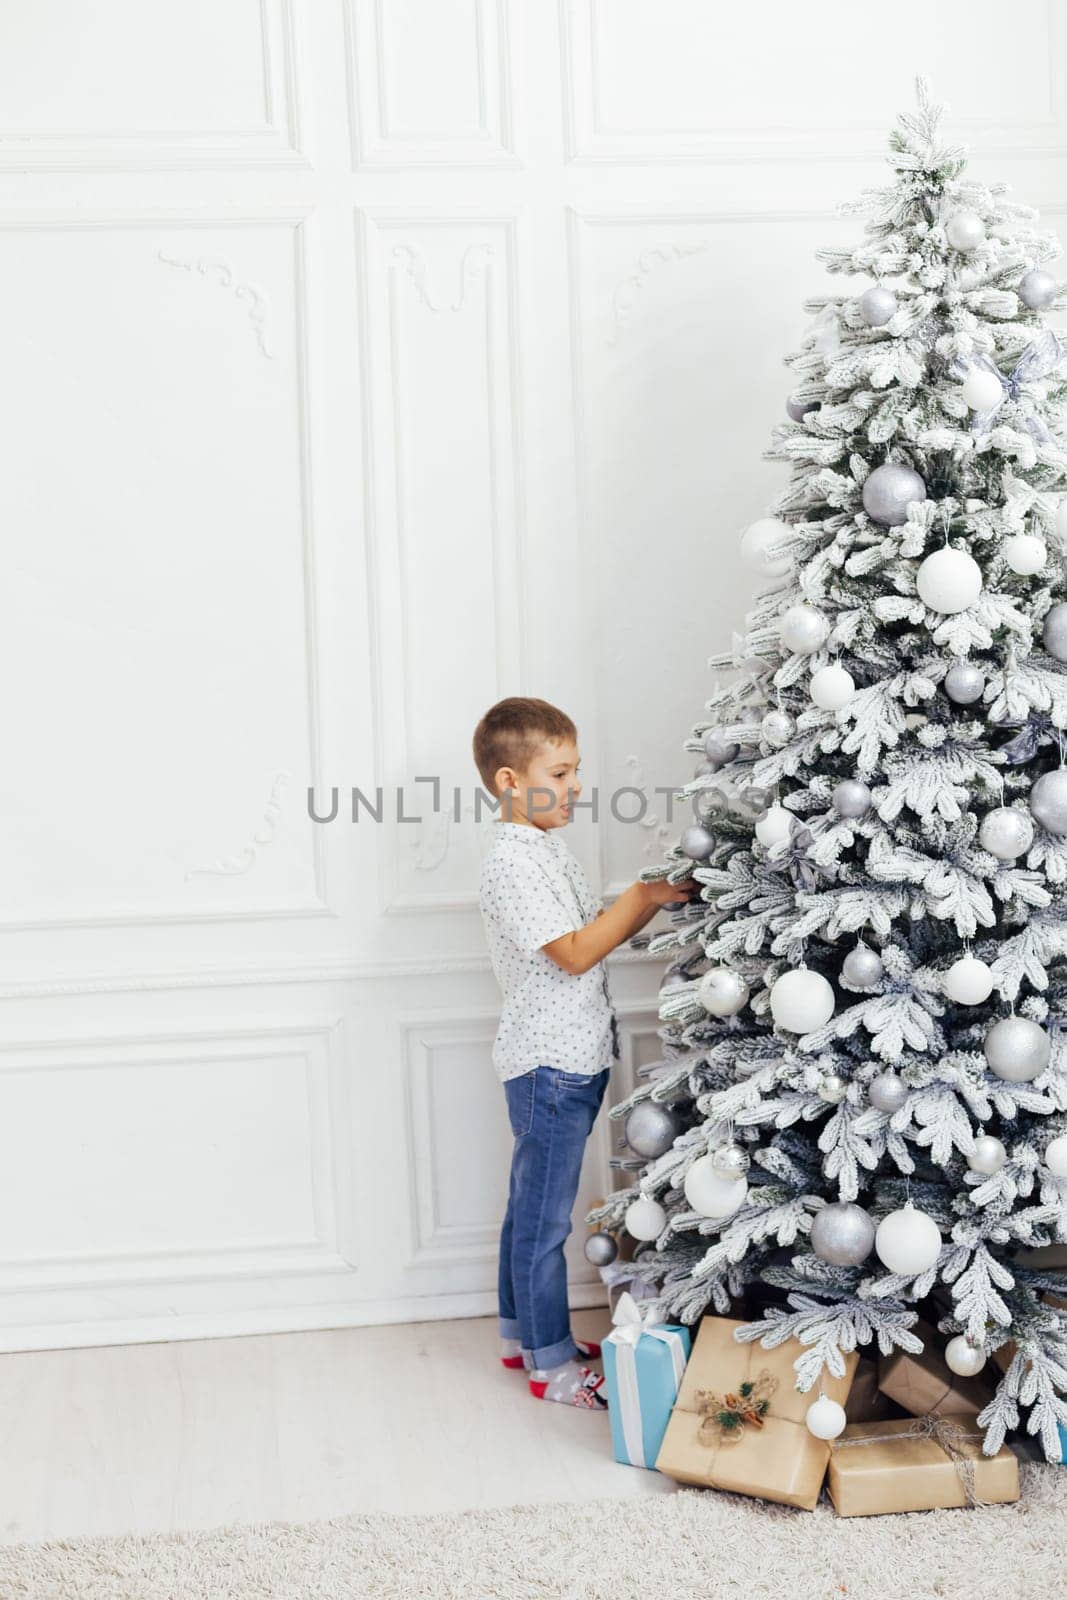 son decorates white Christmas tree with new year gifts